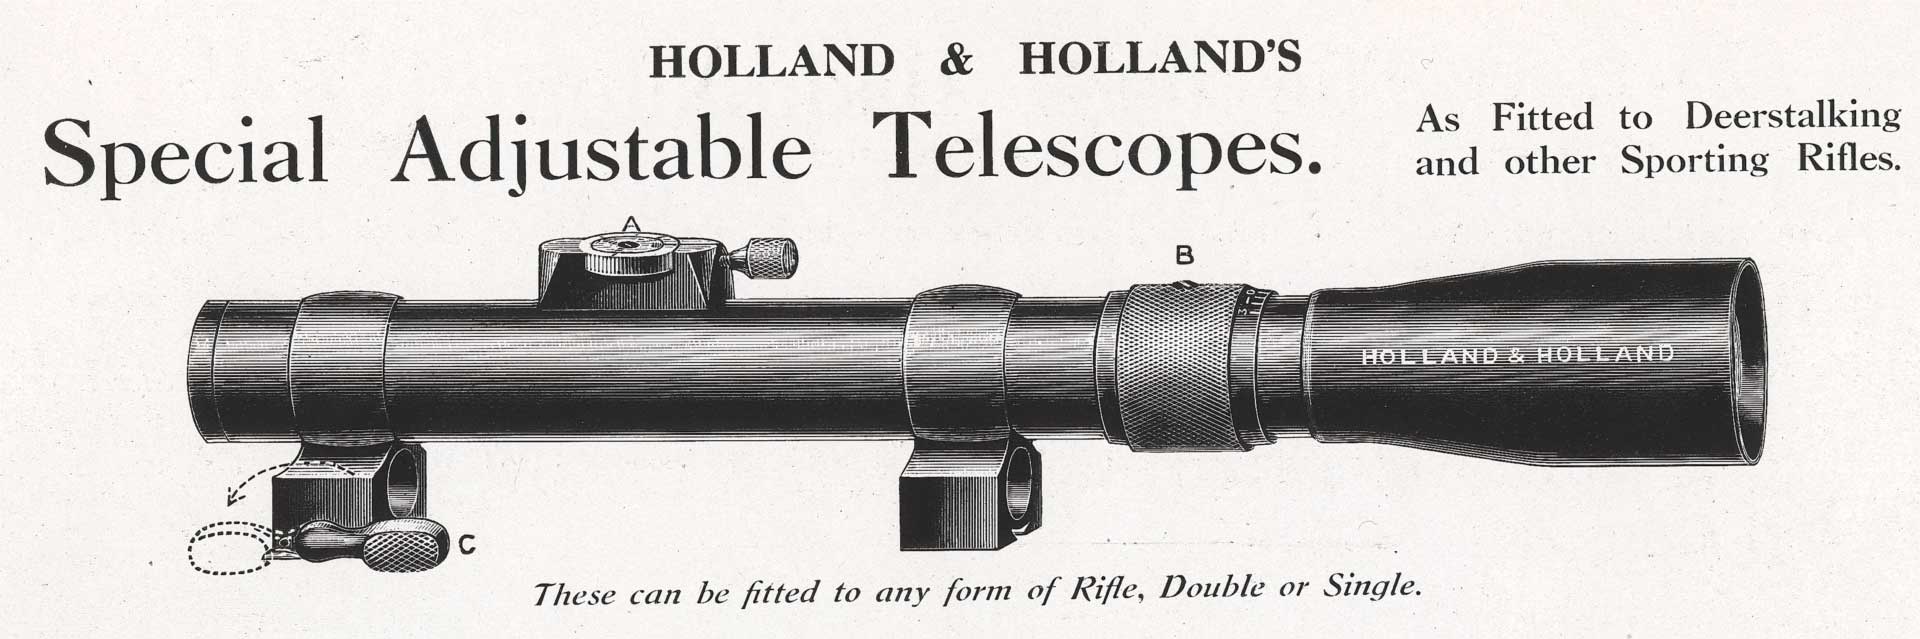 holland and holland riflescope art drawing black and white advertisement